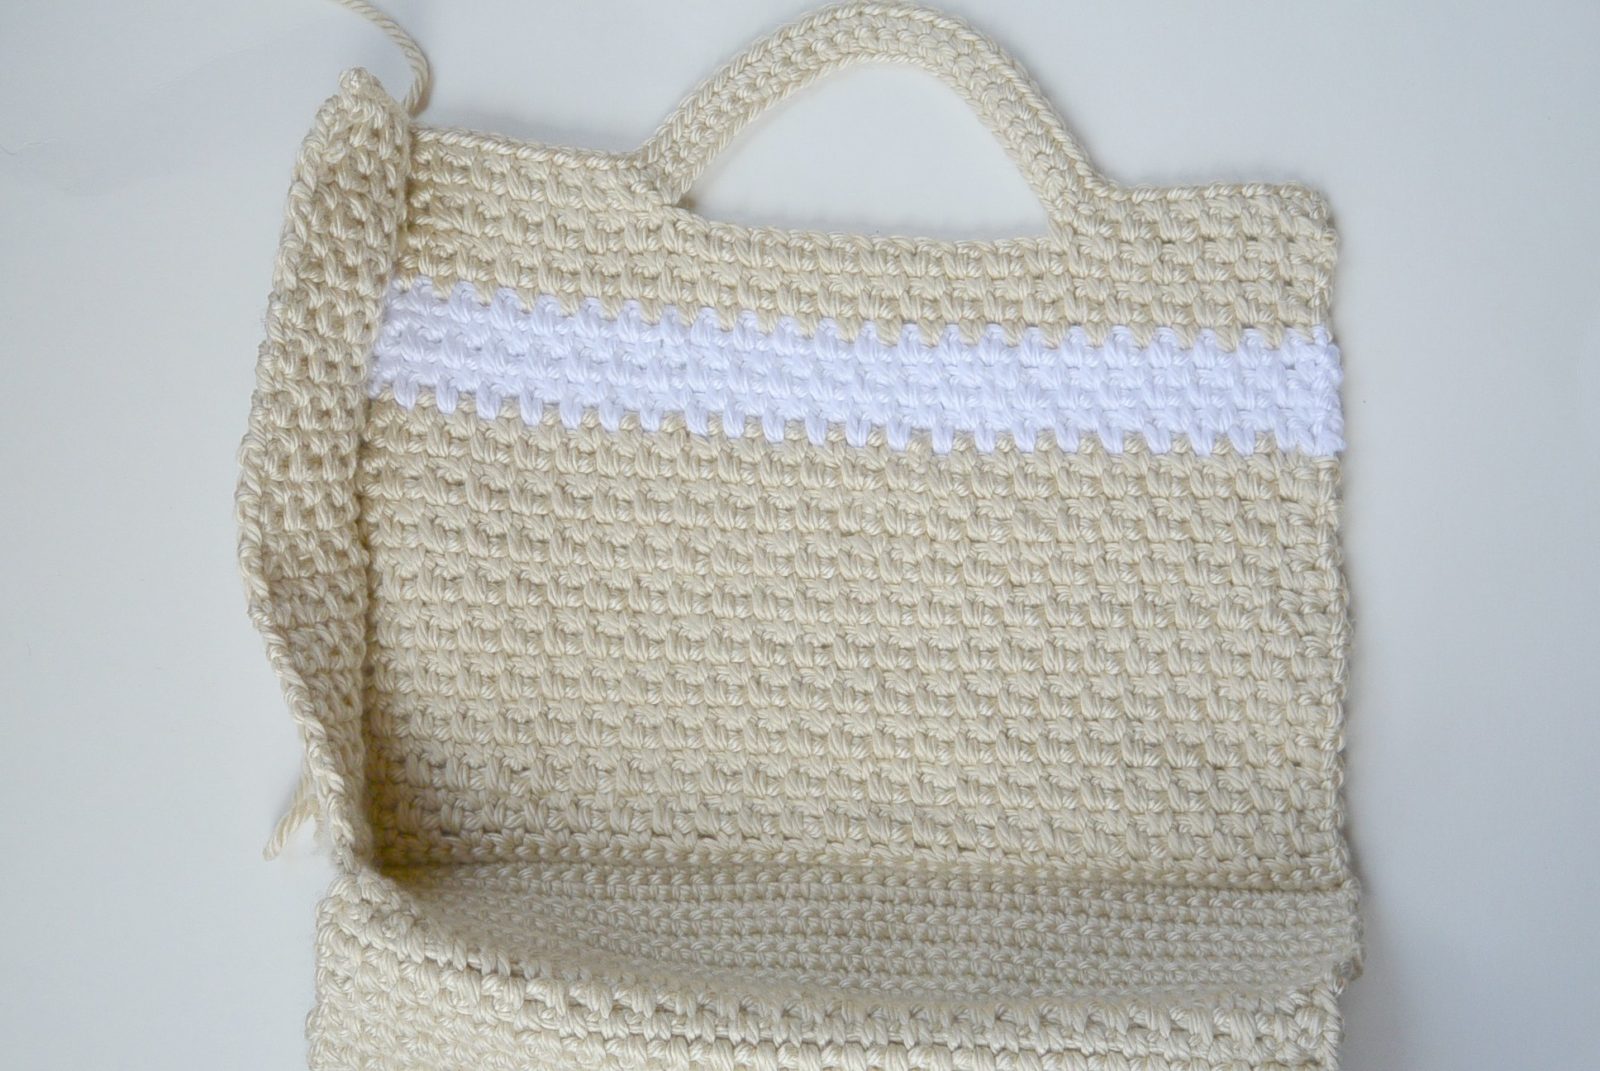 Crochet Purse Patterns for Every Occasion - My Crochet Space